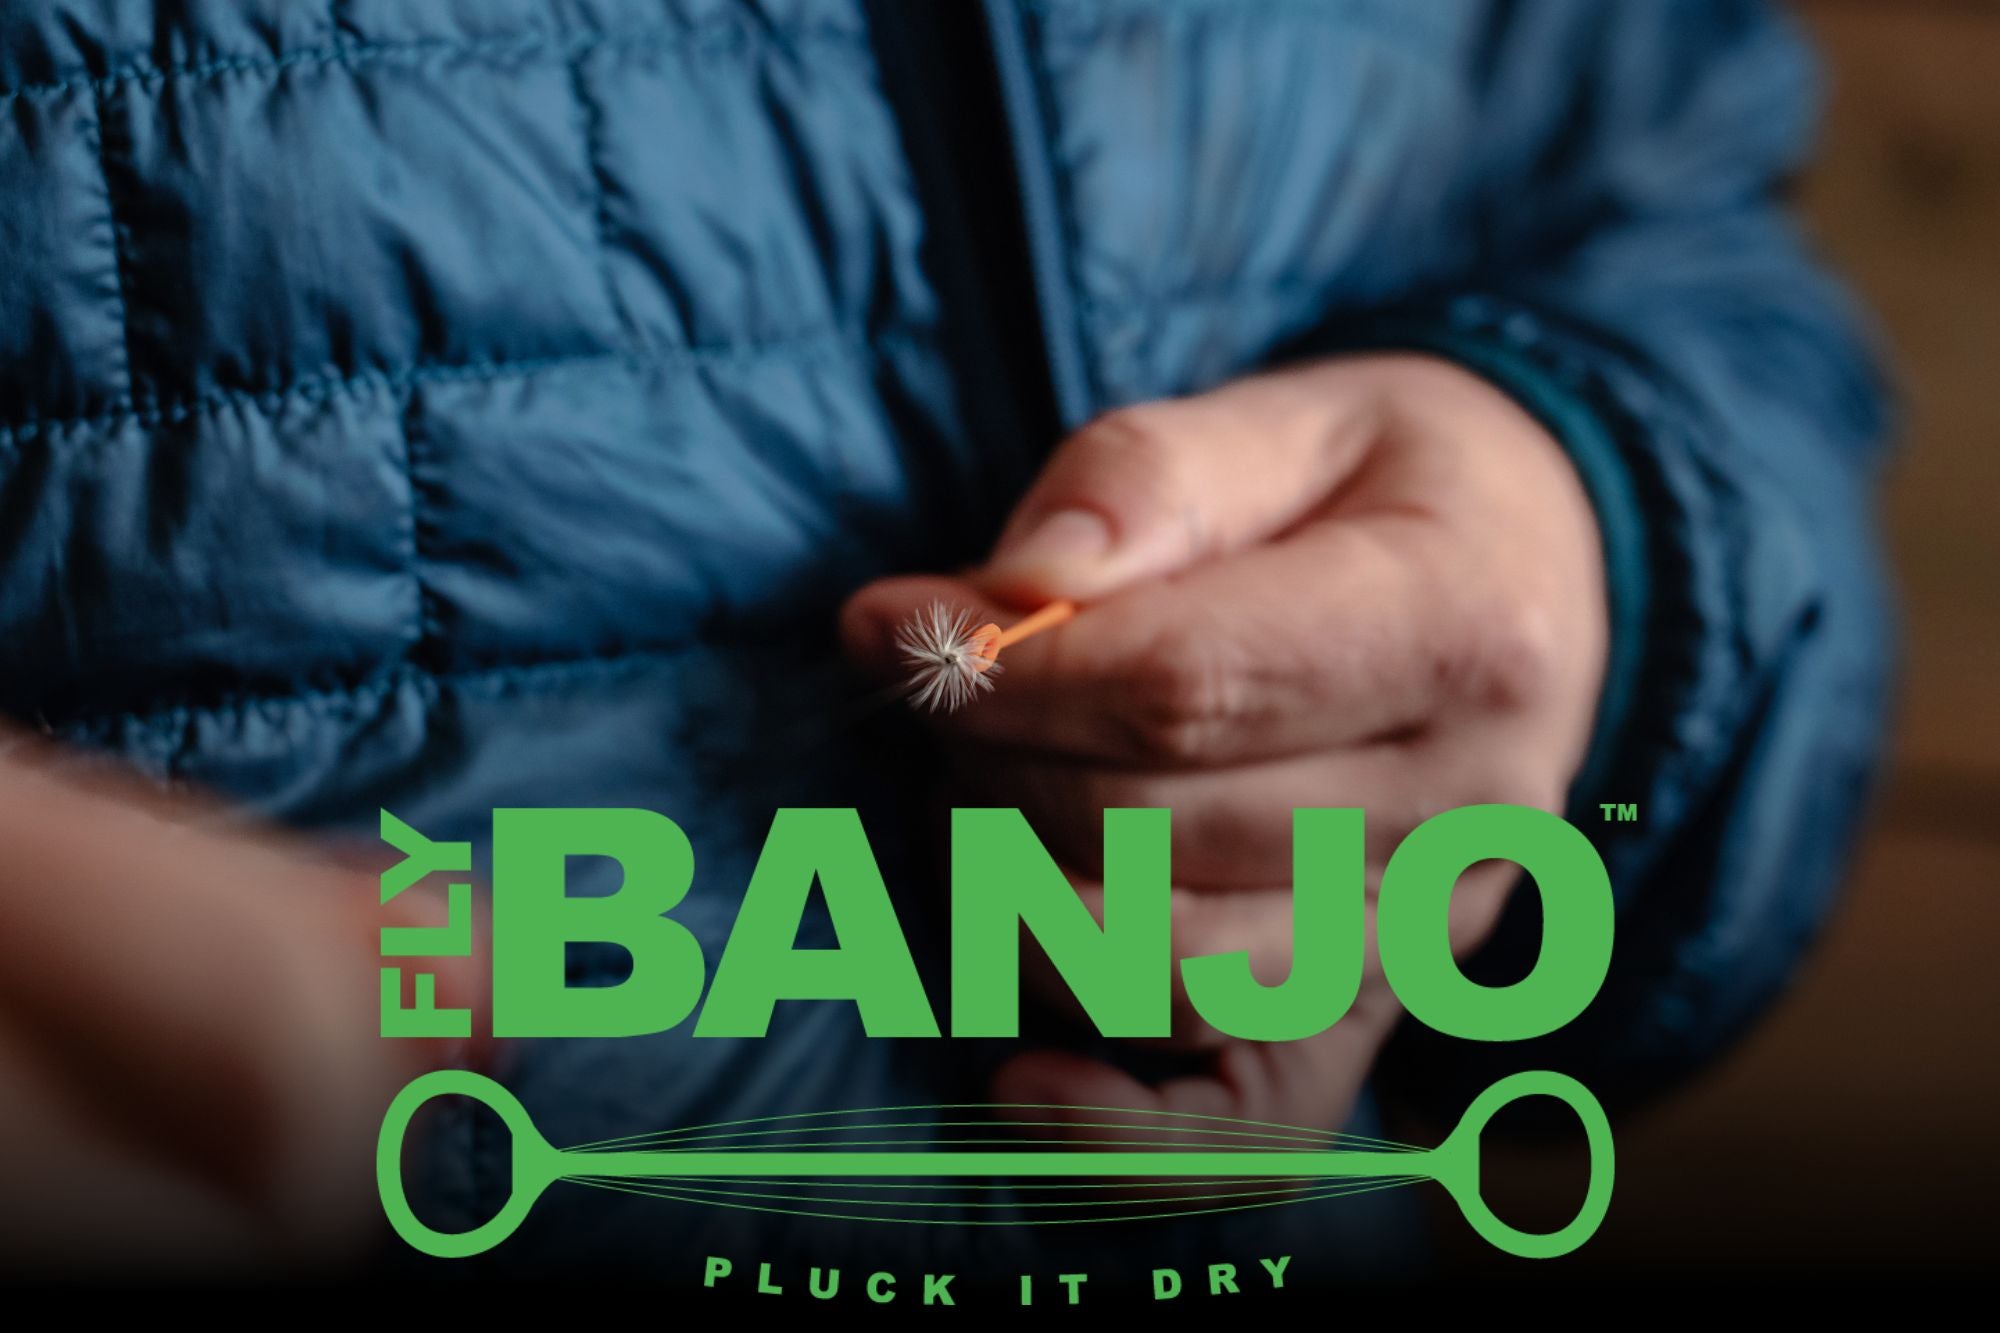 NEW PRODUCT - Introducing the Fly Banjo